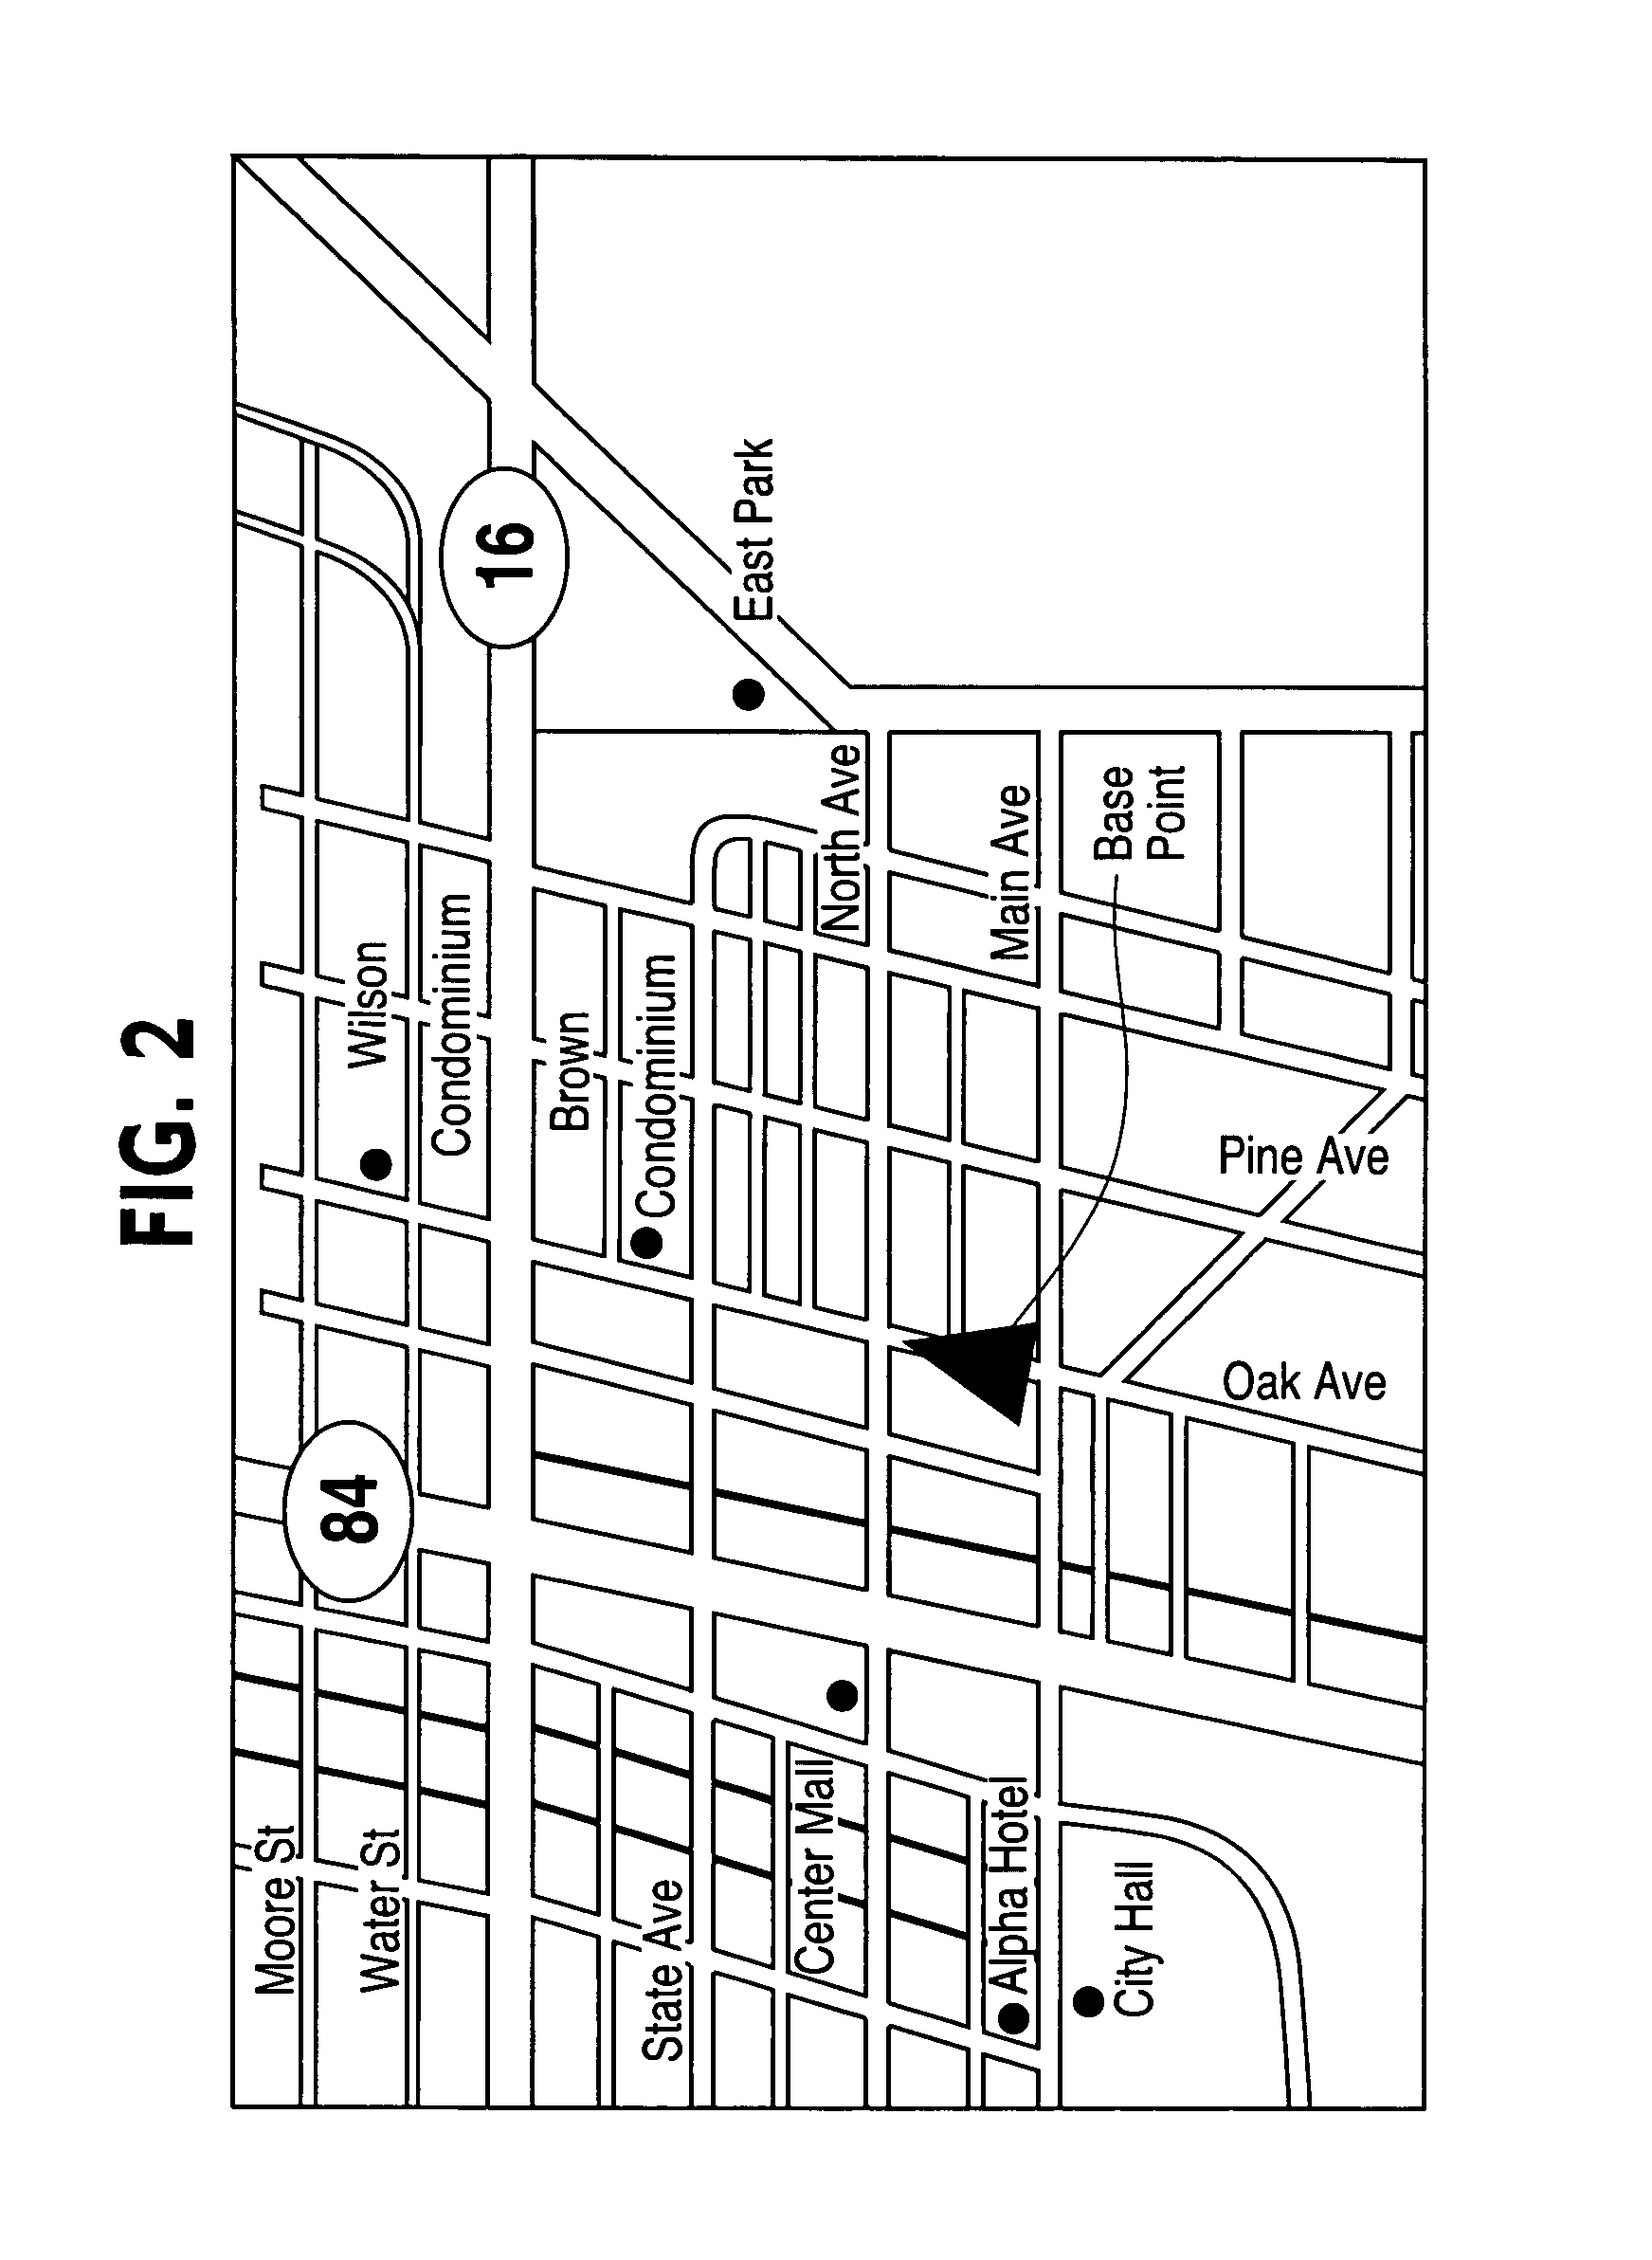 Speech recognition support method and apparatus